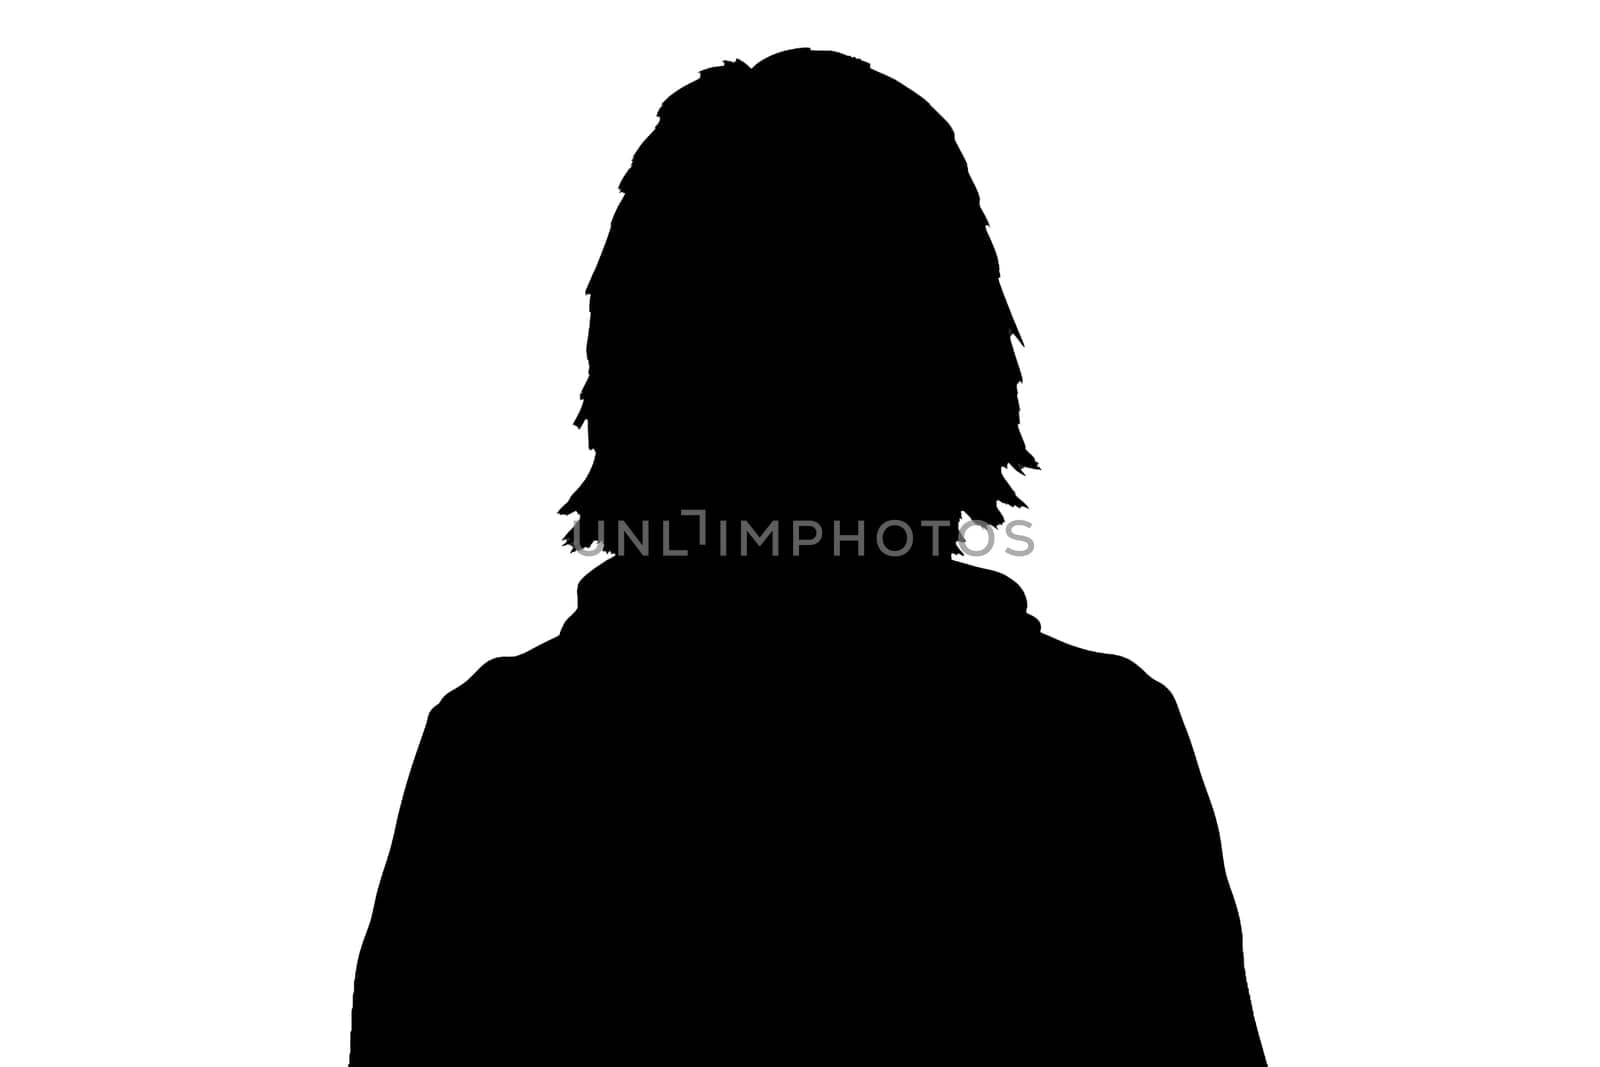 Black silhouette of an unknown person on a white background. by MP_foto71